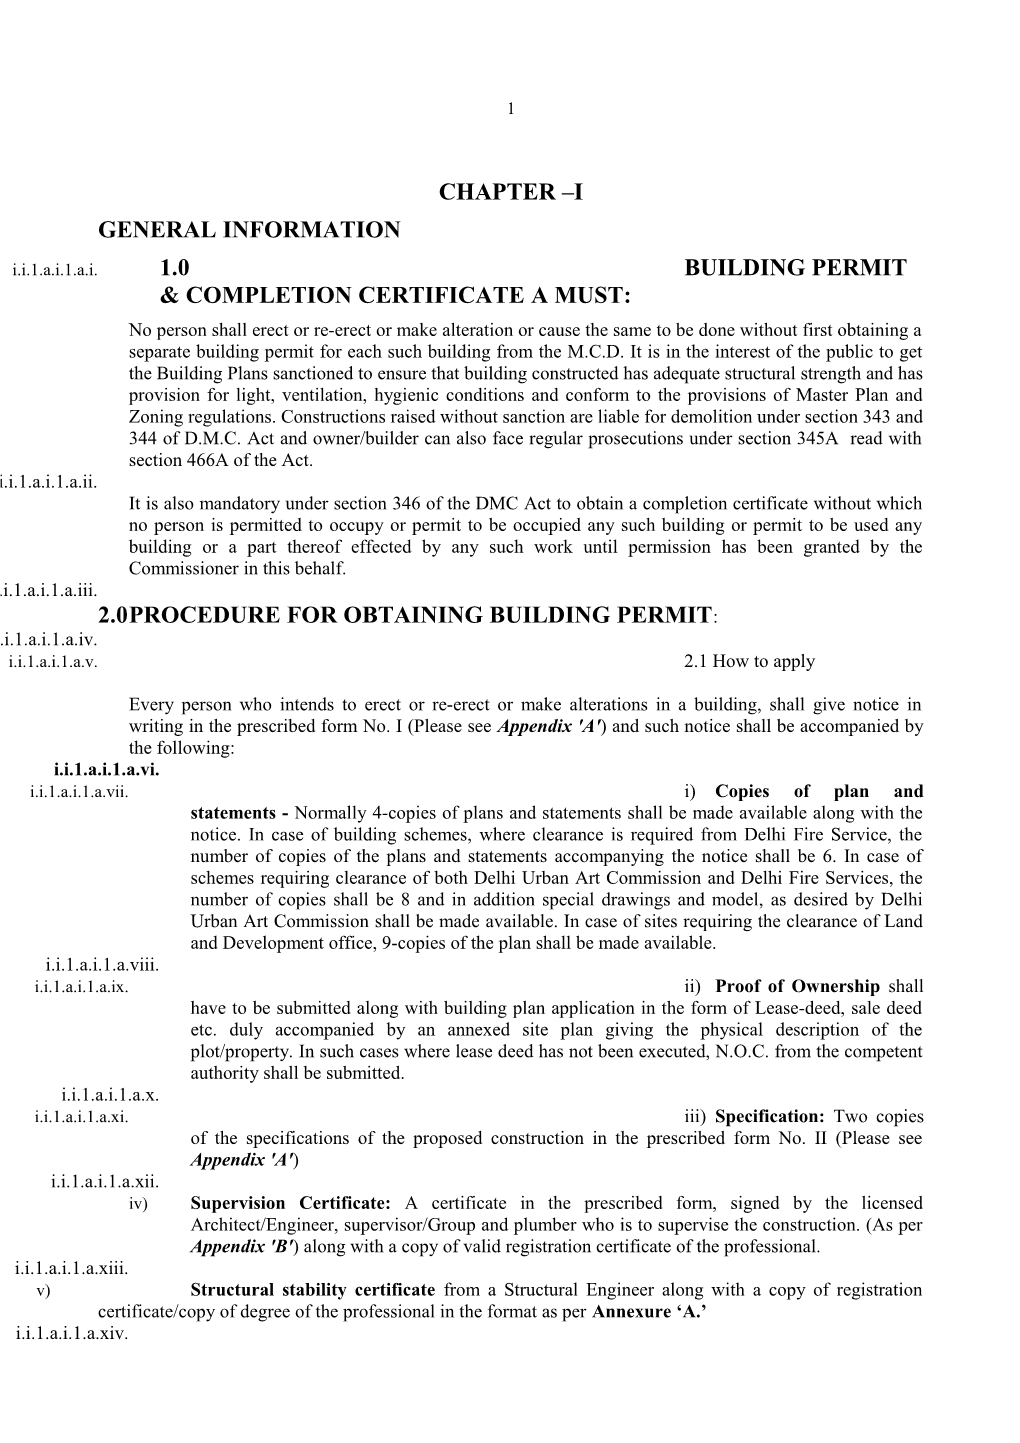 1.0 Building Permit & Completion Certificate a Must